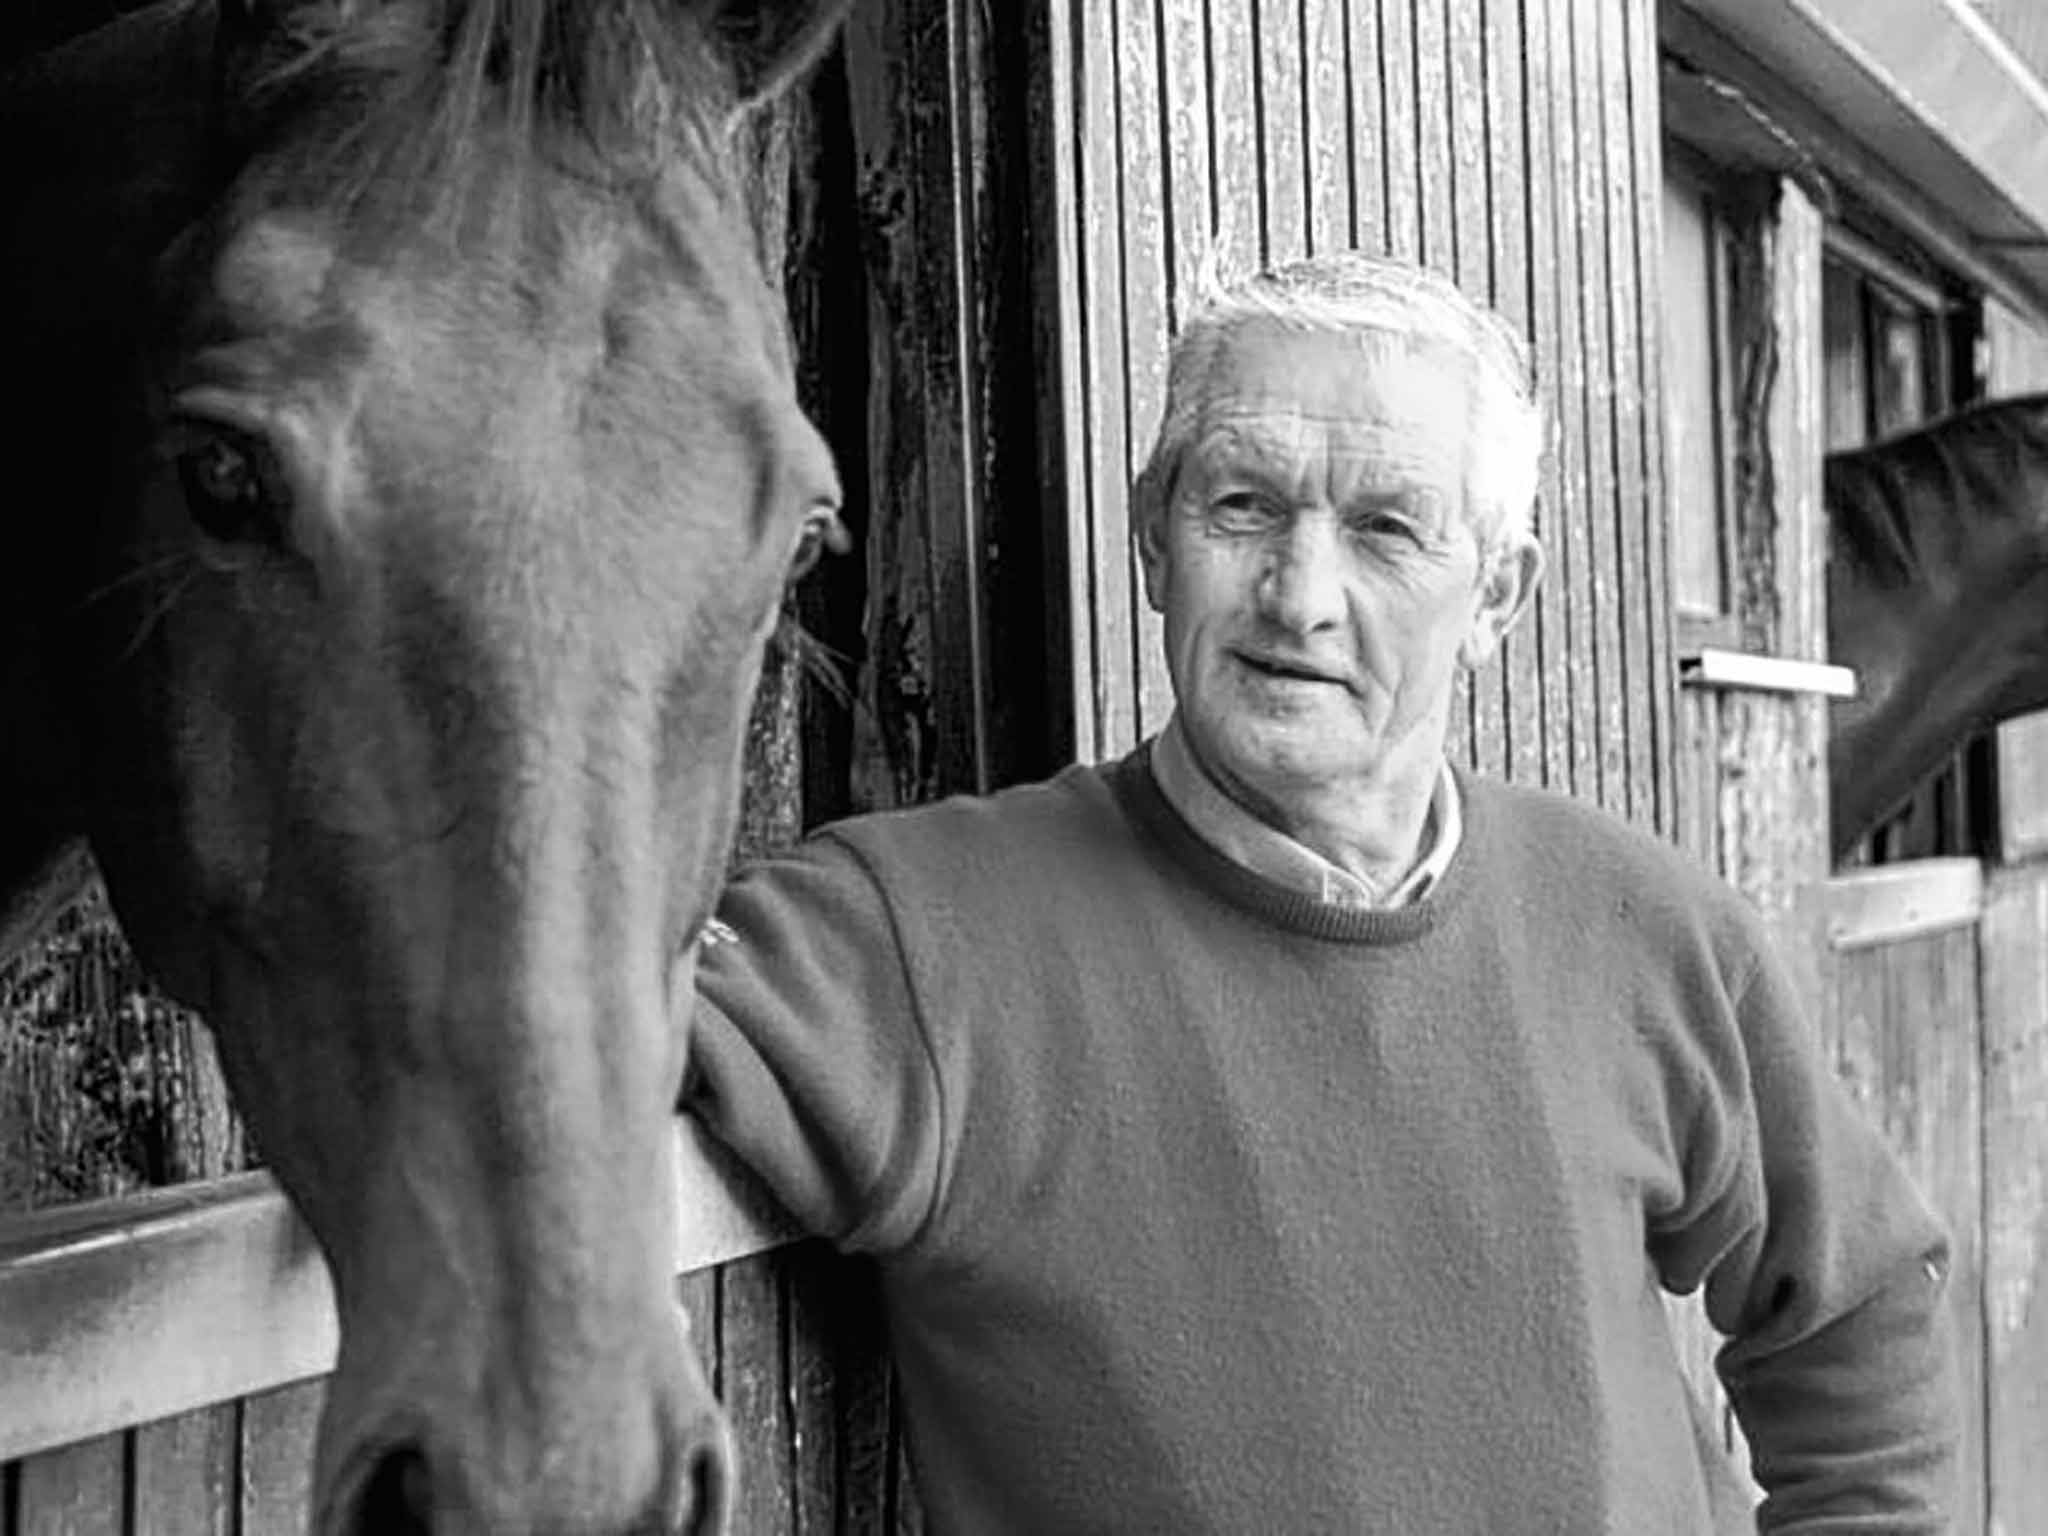 Hughes in 2005 at his stables with Hardy Eustace, the best horse he trained